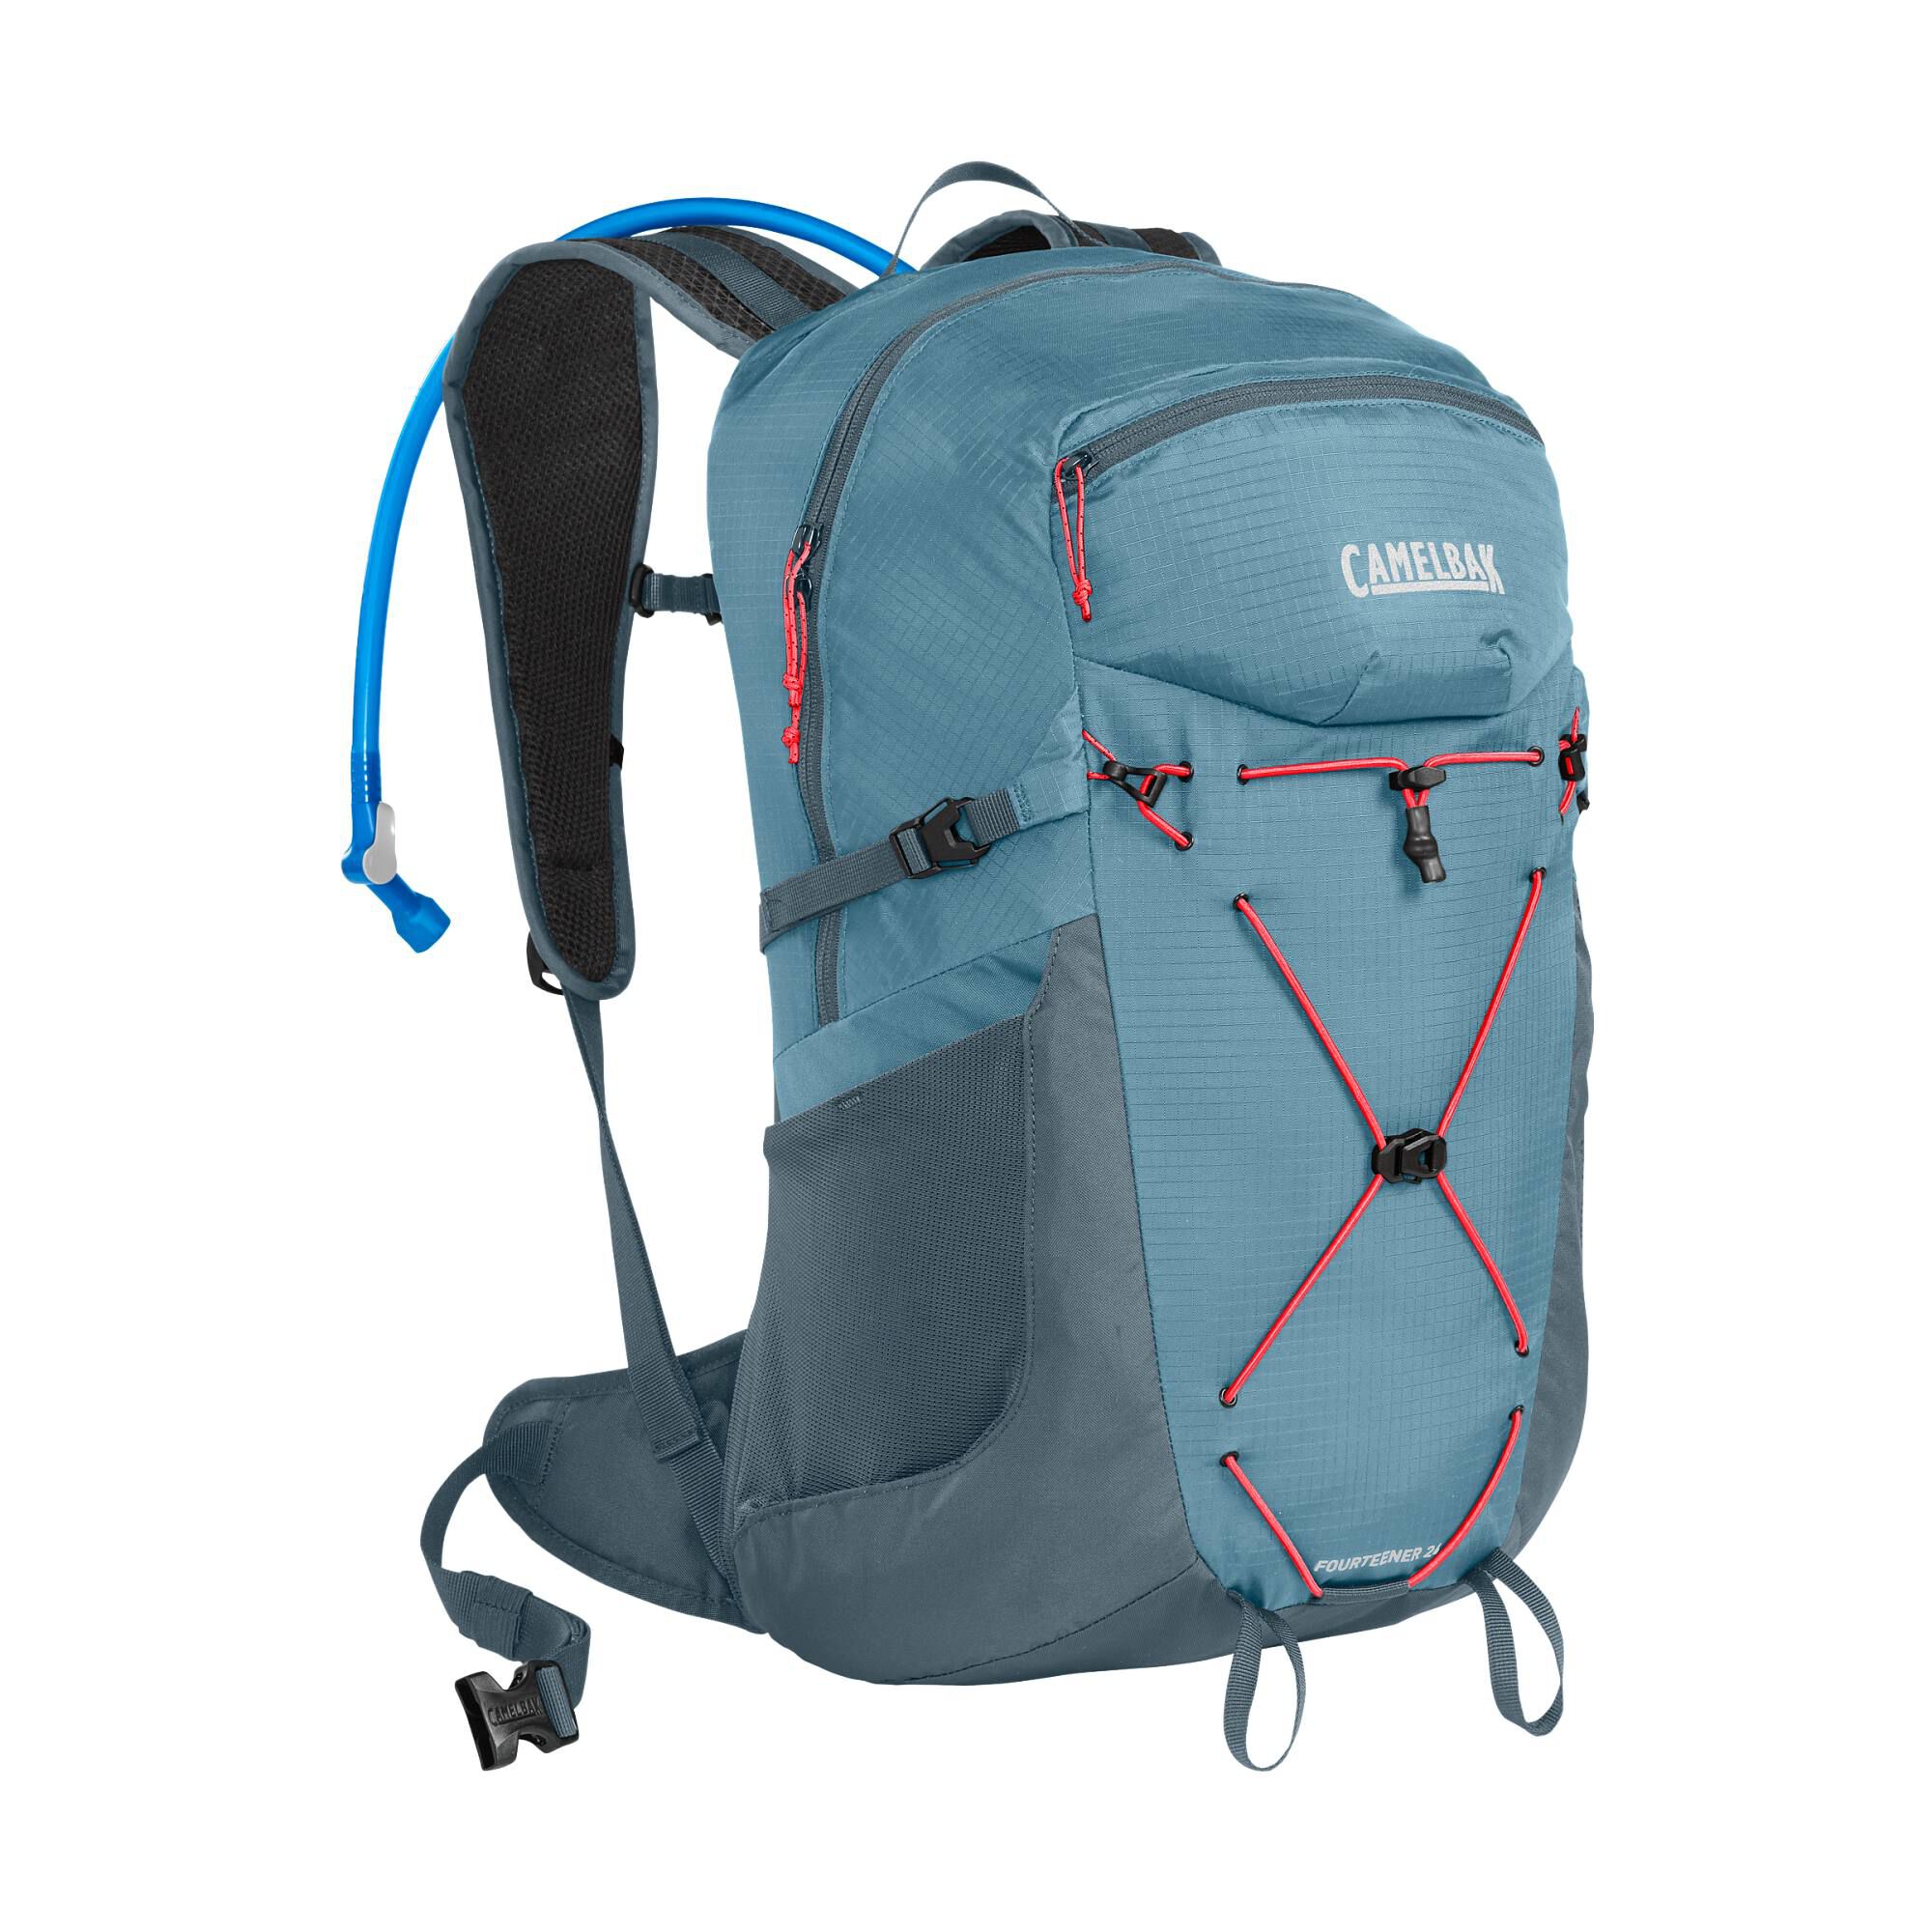 Blue Nylon Hiking Backpack Trekking Bag at Rs 450 in Pune | ID: 10207763012